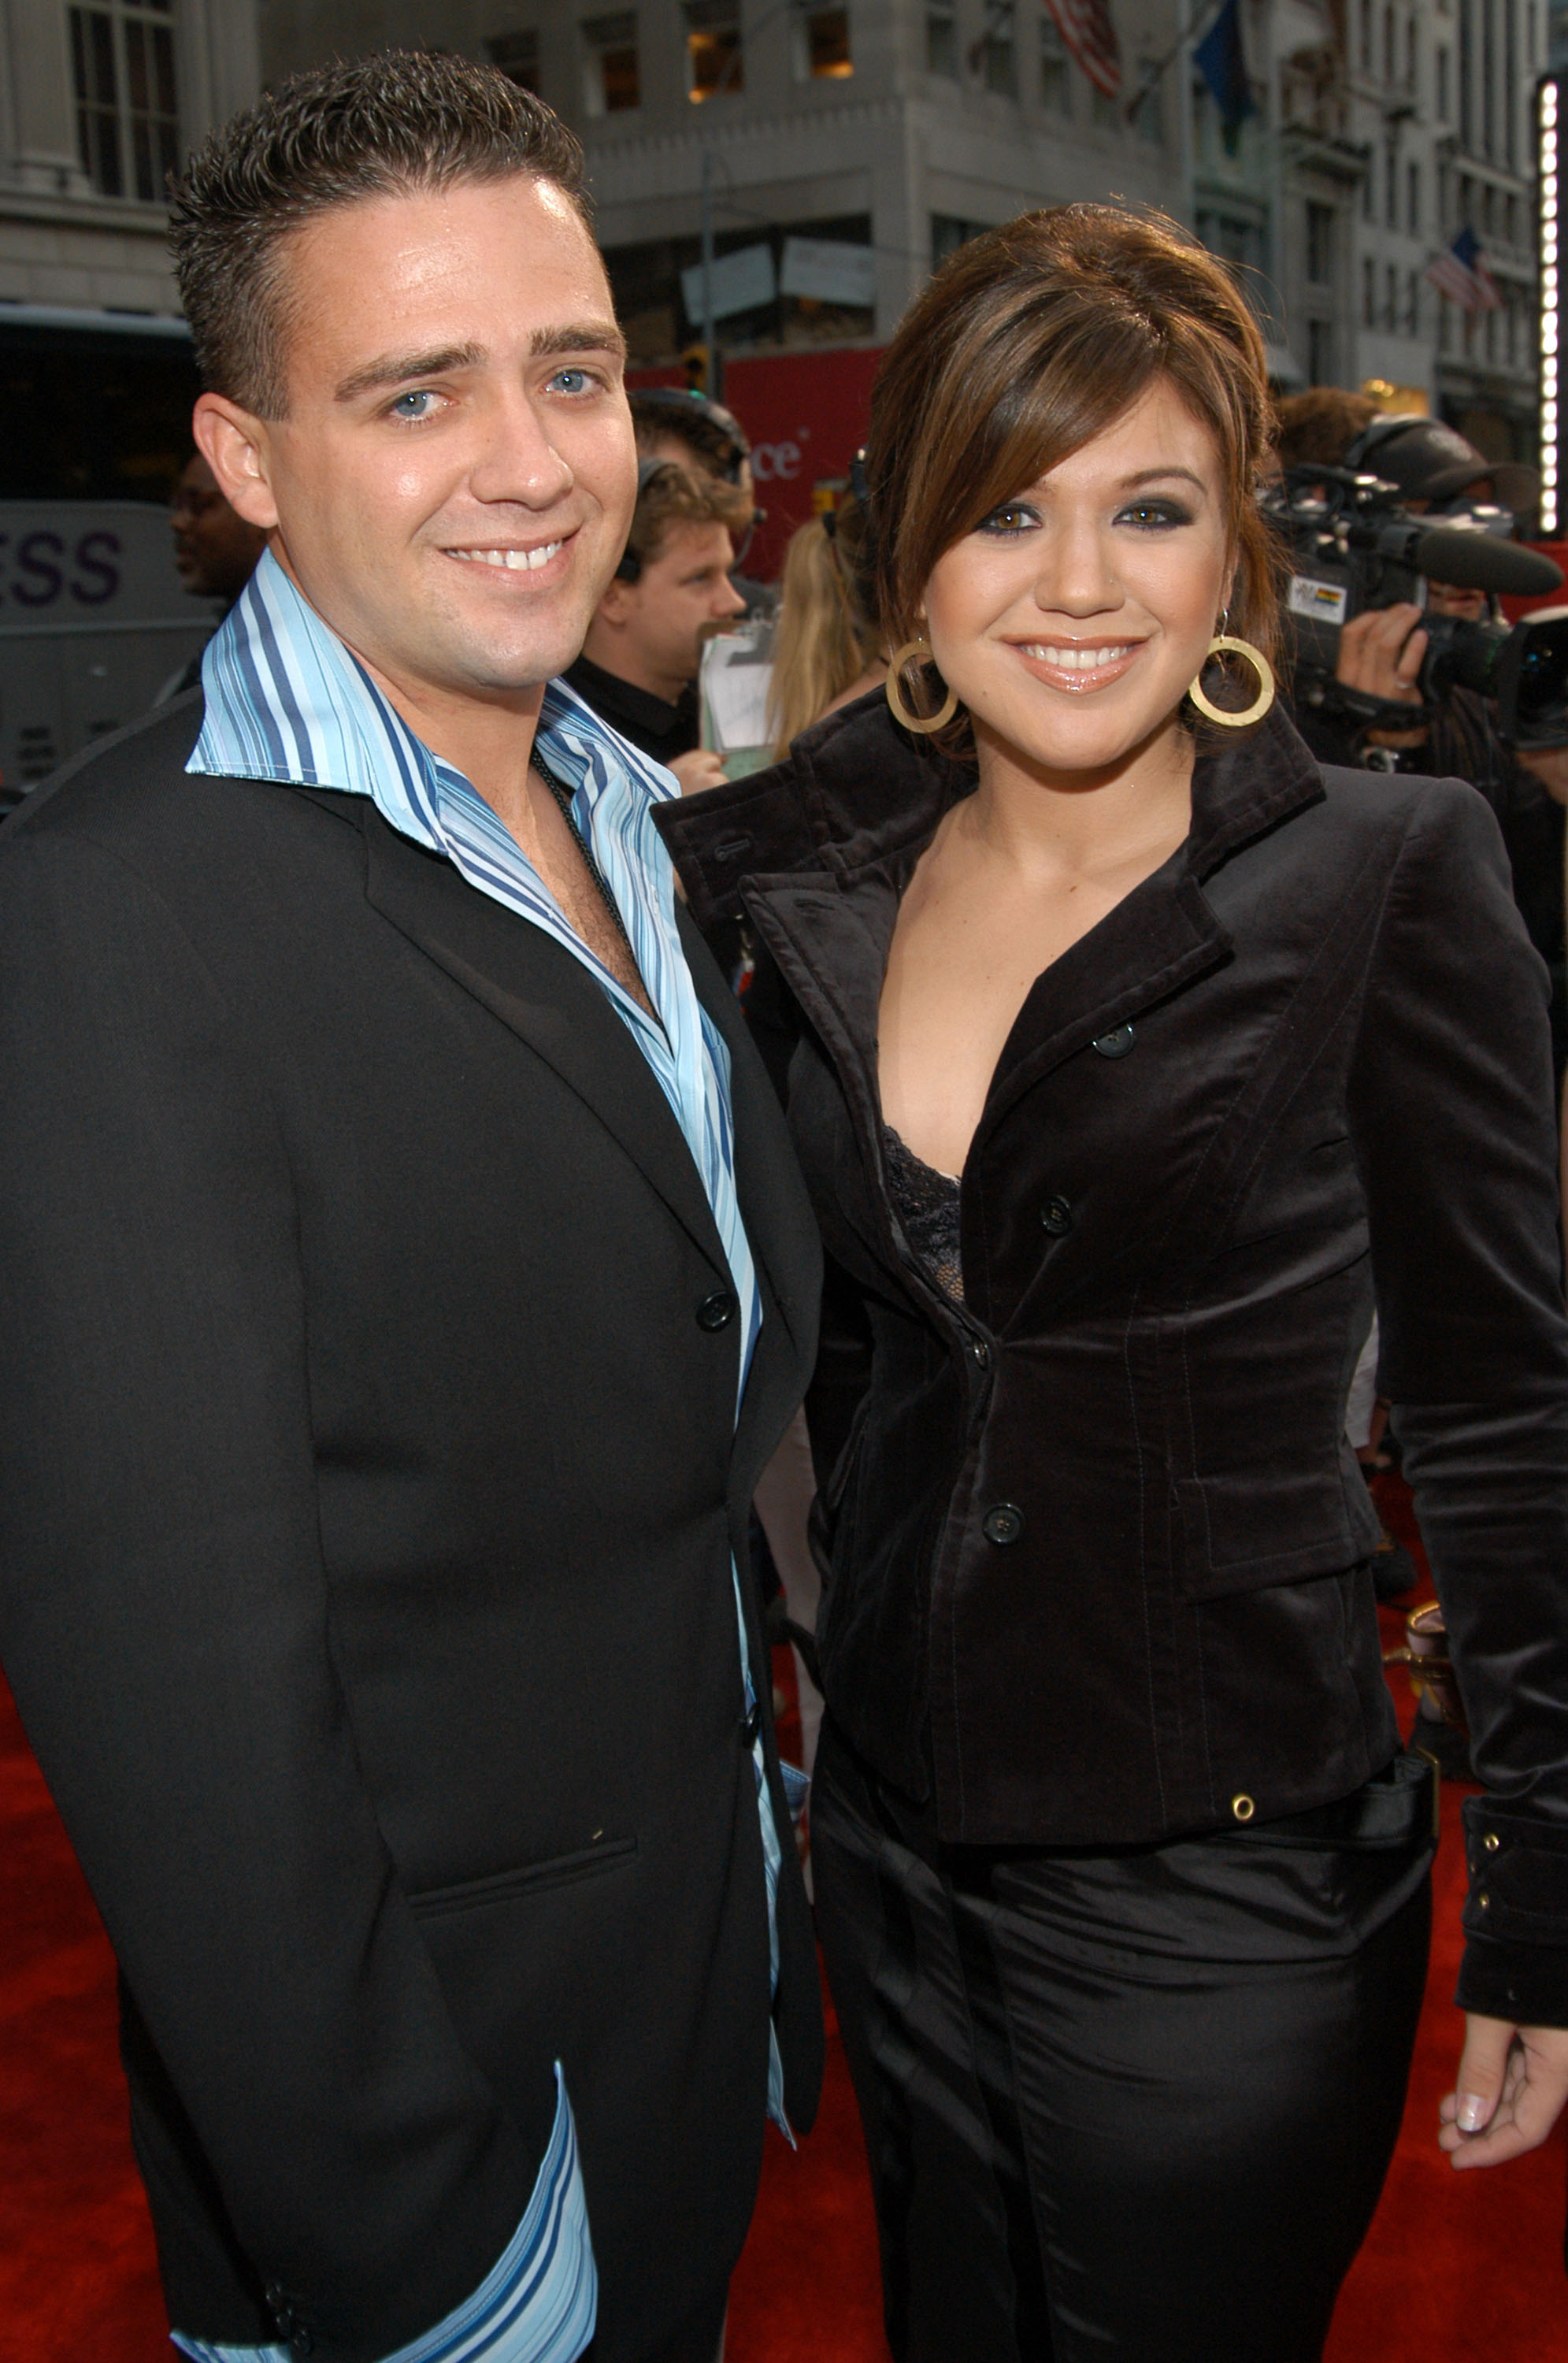 Jason Clarkson and Kelly Clarkson during the 2003 MTV Video Music Awards at Radio City Music Hall on August 28, 2003, in New York City. | Source: Getty Images